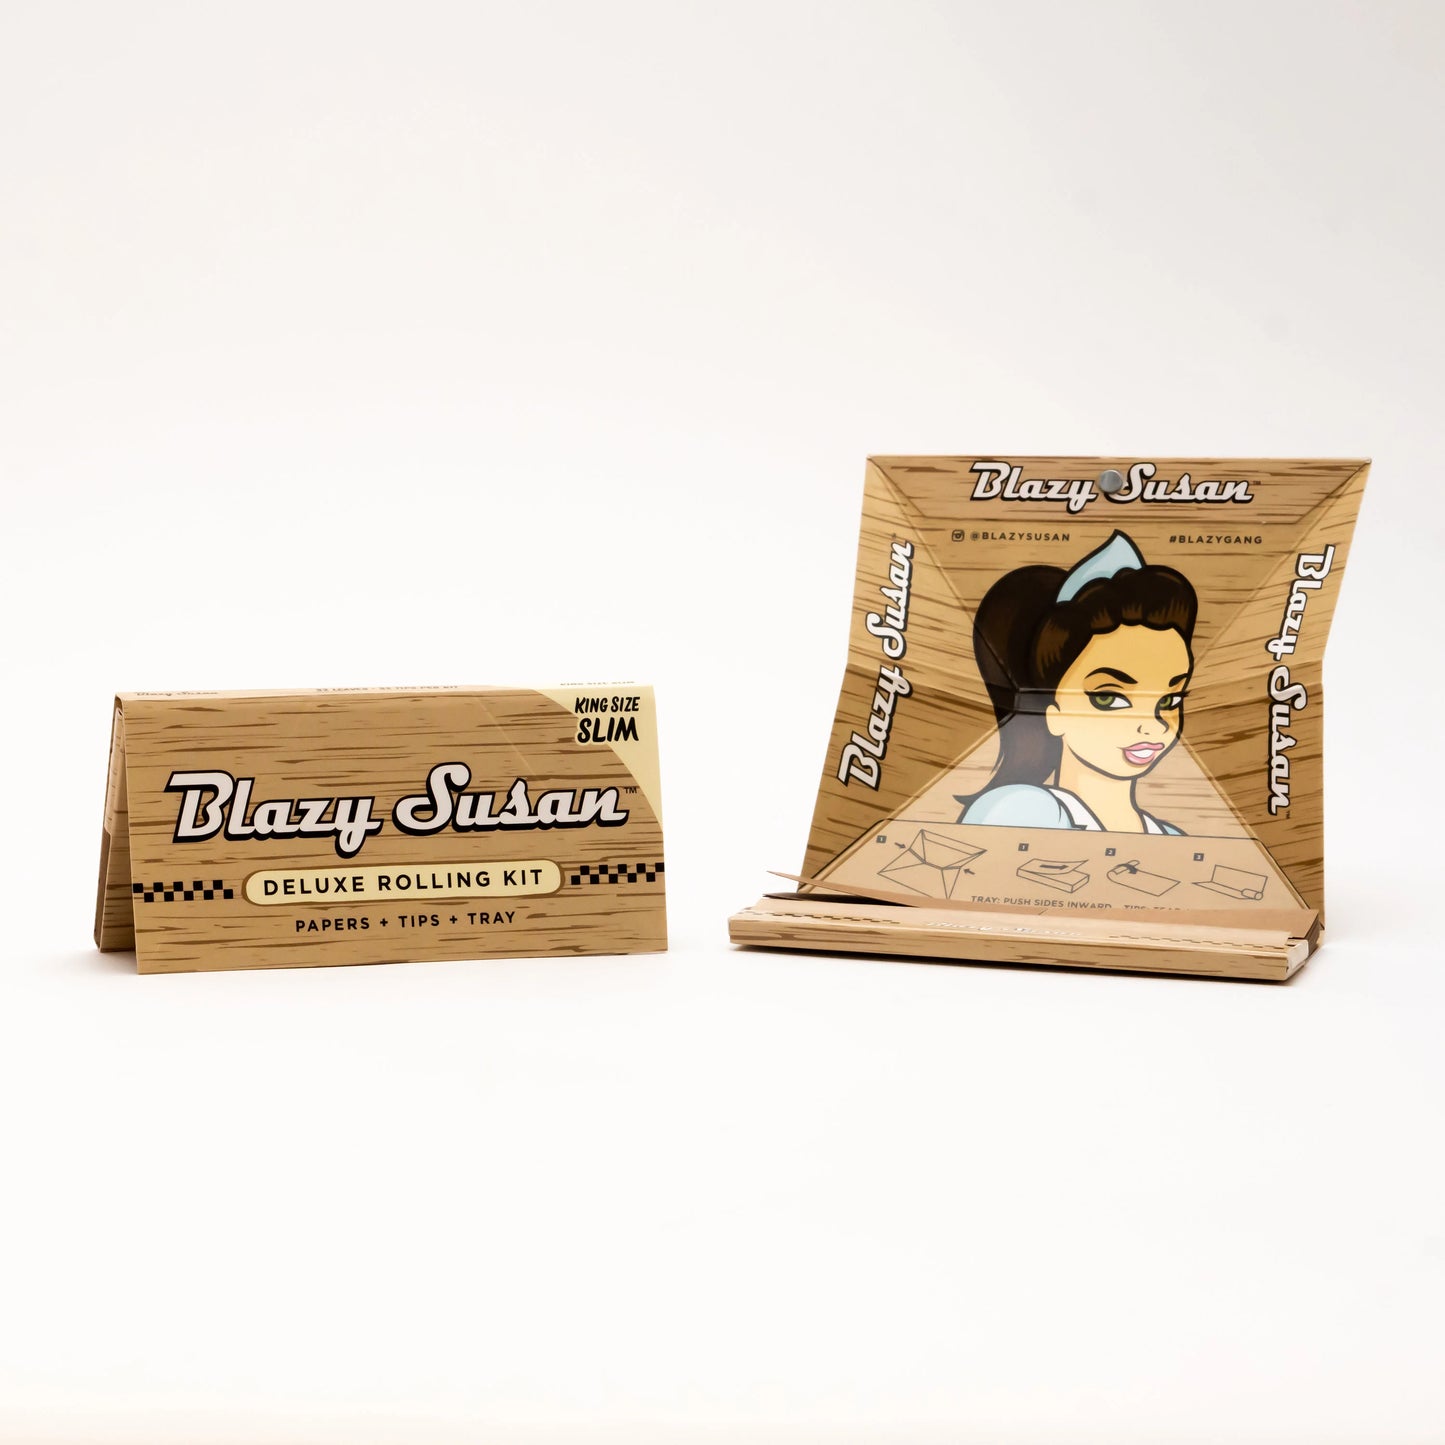 Blazy Susan - Brown (Unbleached), Deluxe Rolling Kit- King Size Slims (Papers, Tips & Tray)